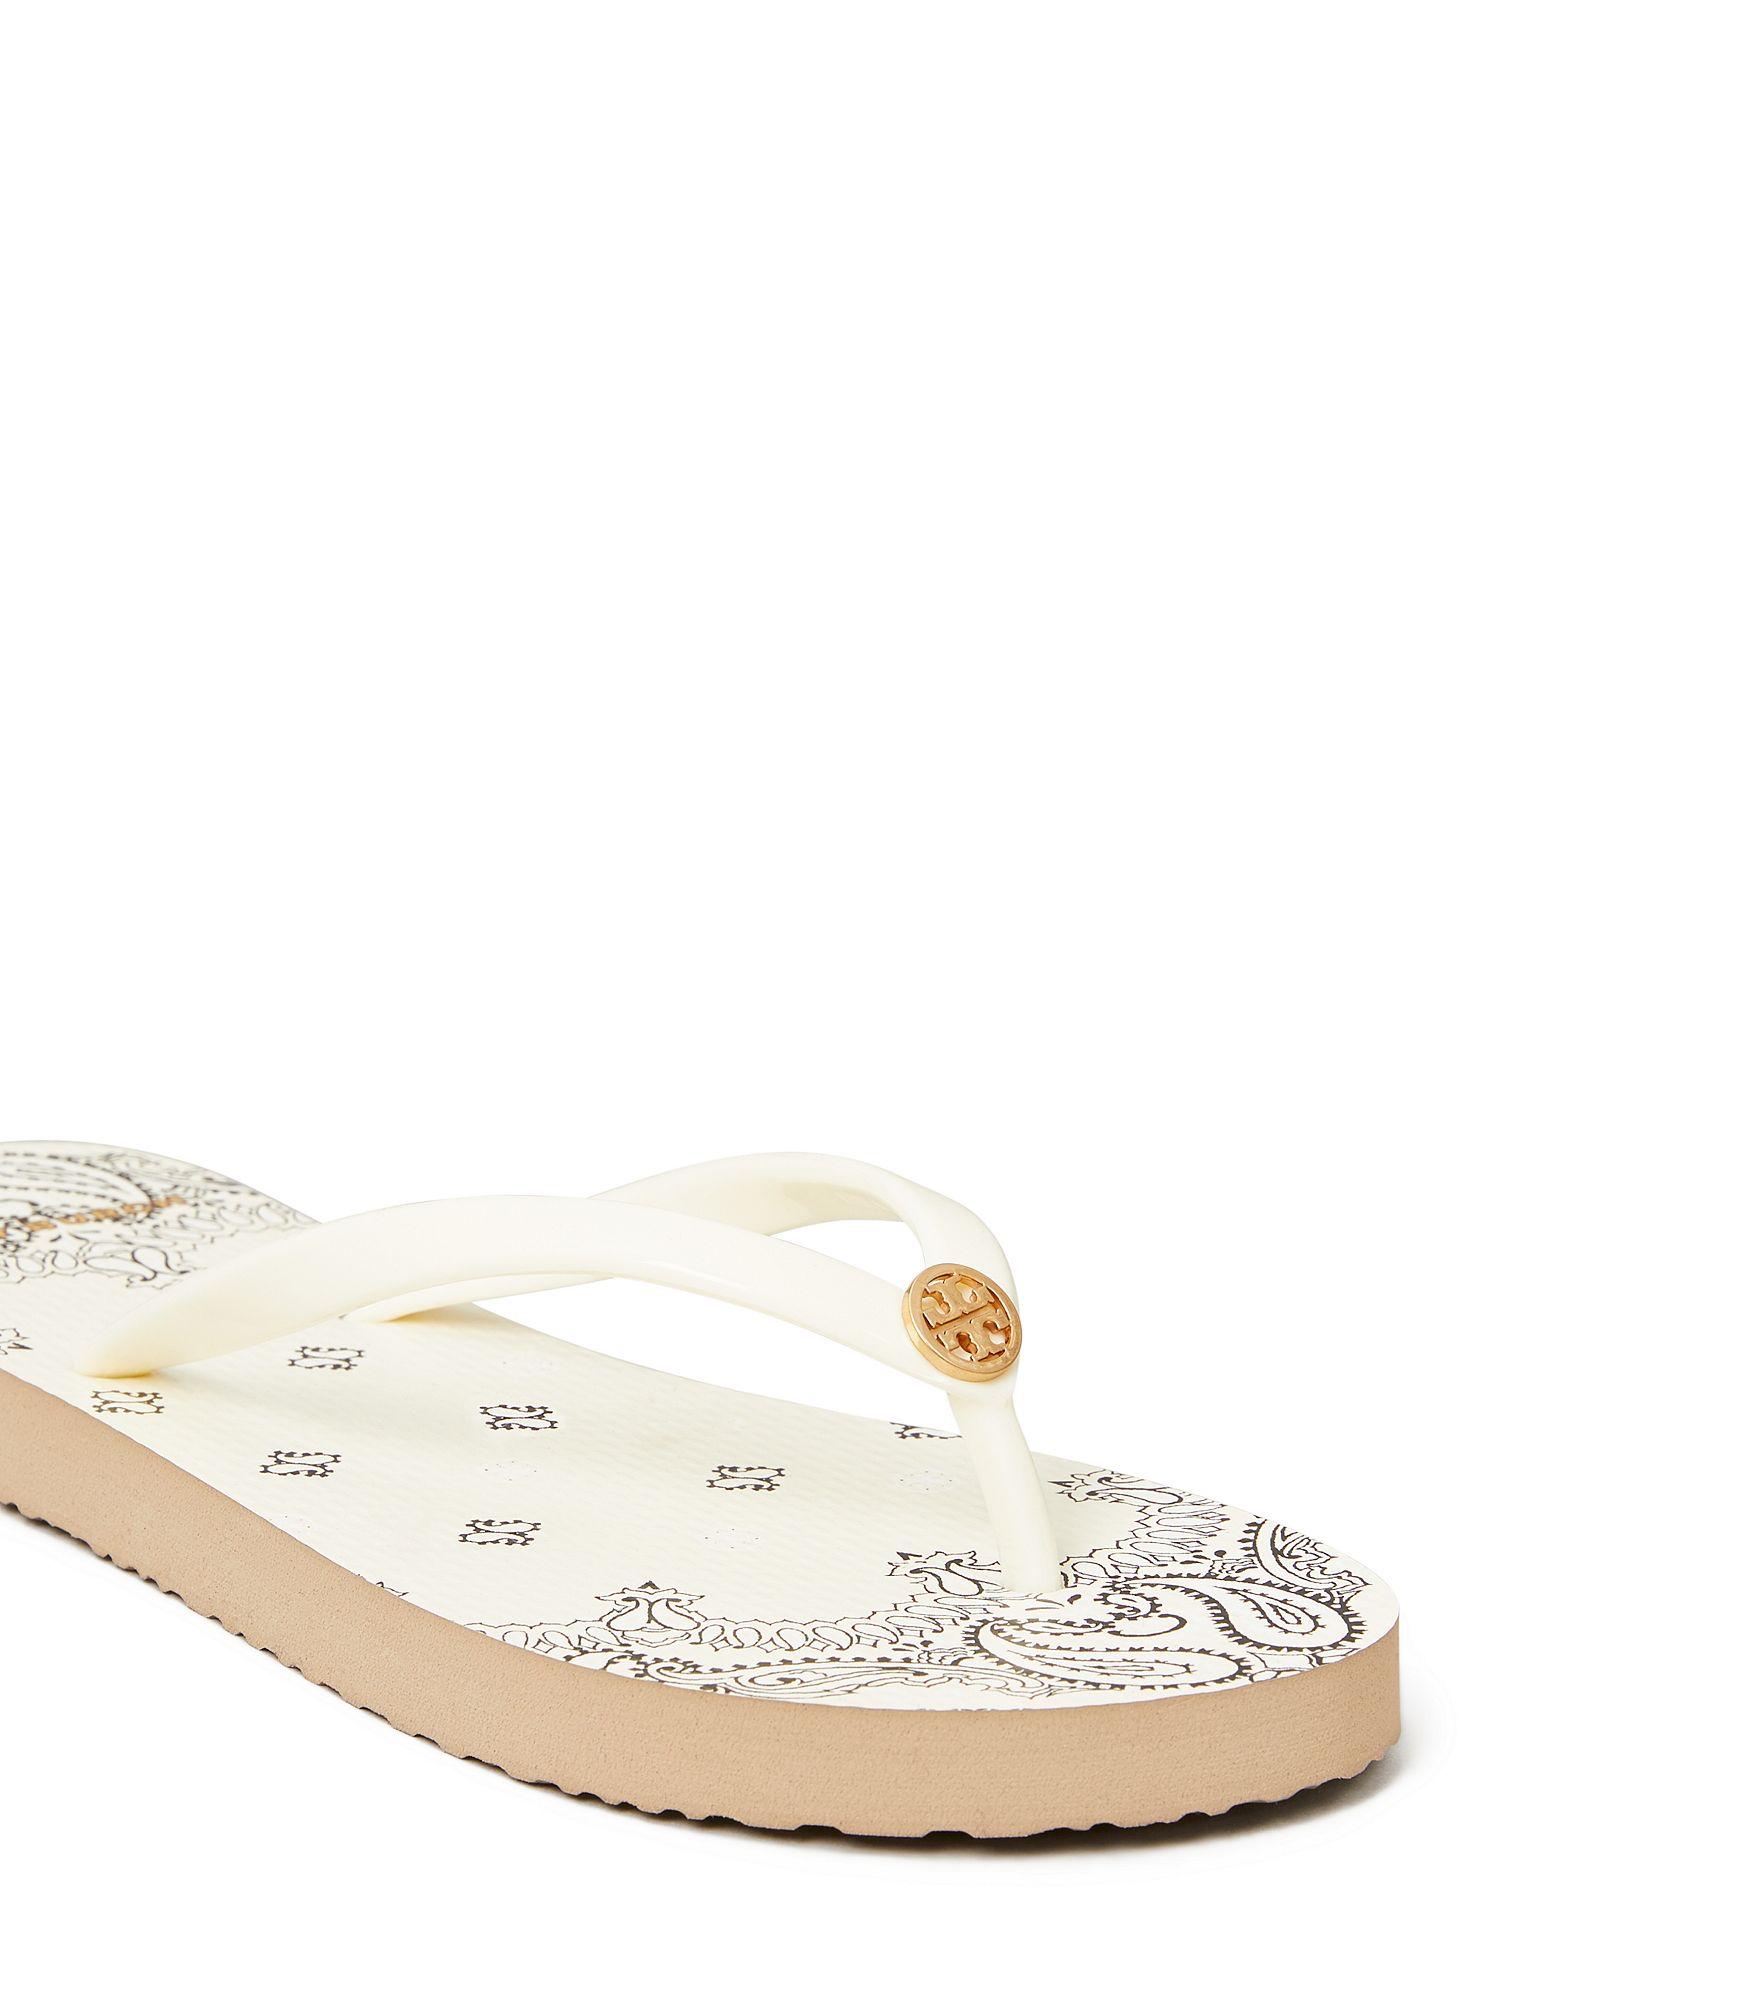 Tory Burch Printed Thin Flip Flops in Cream (White) - Save 11% - Lyst